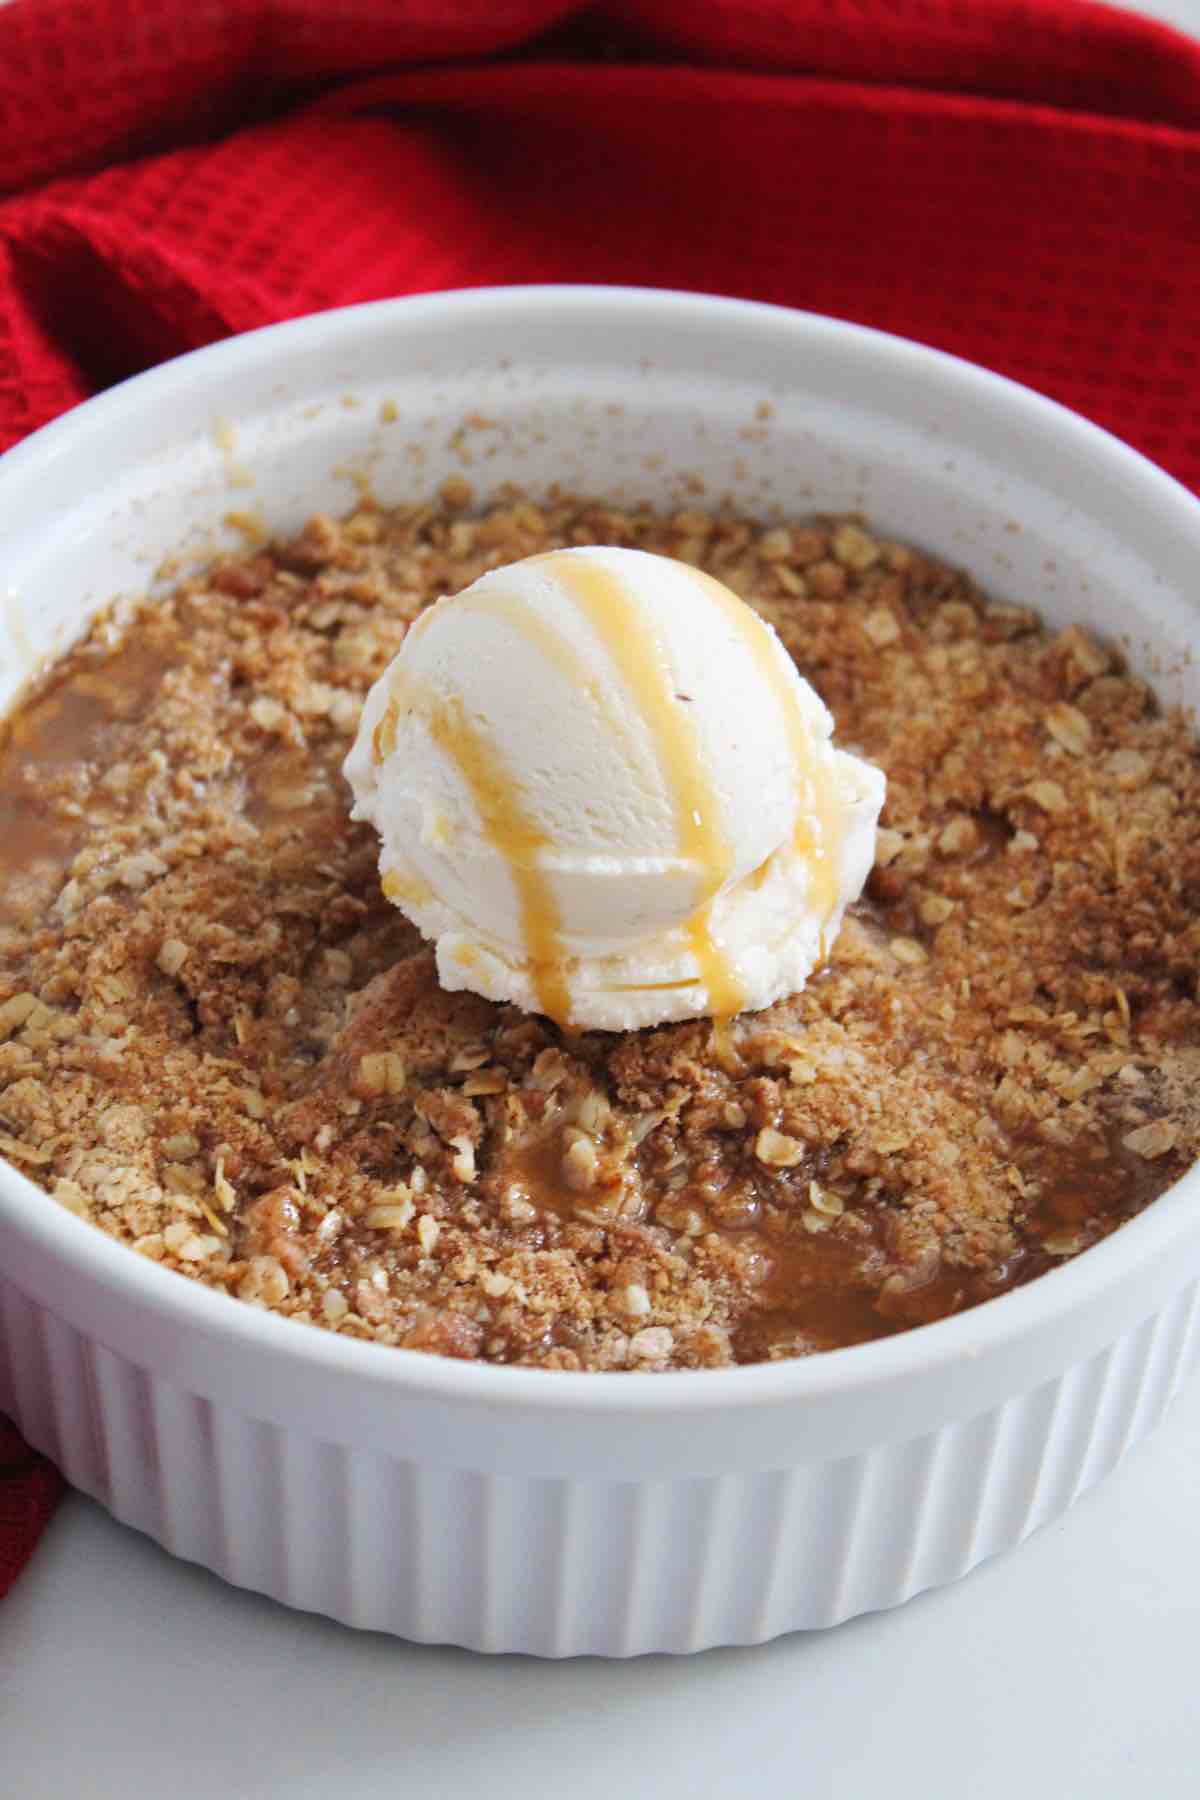 This recipe for air fryer apple crumble is perfect for the fall season.